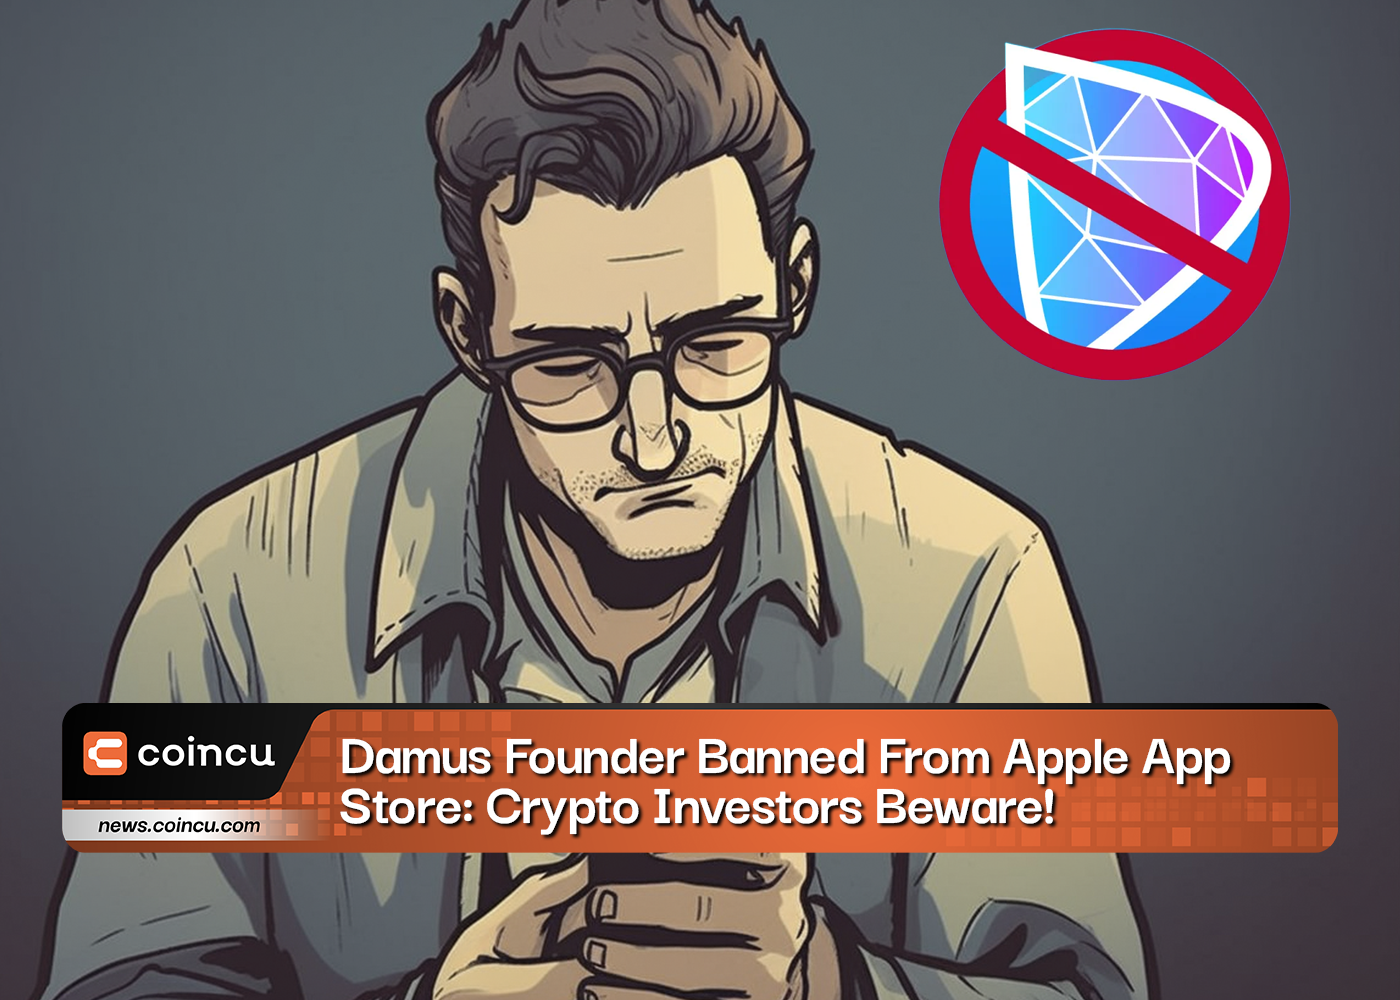 Damus Founder Banned From Apple App Store Crypto Investors Beware